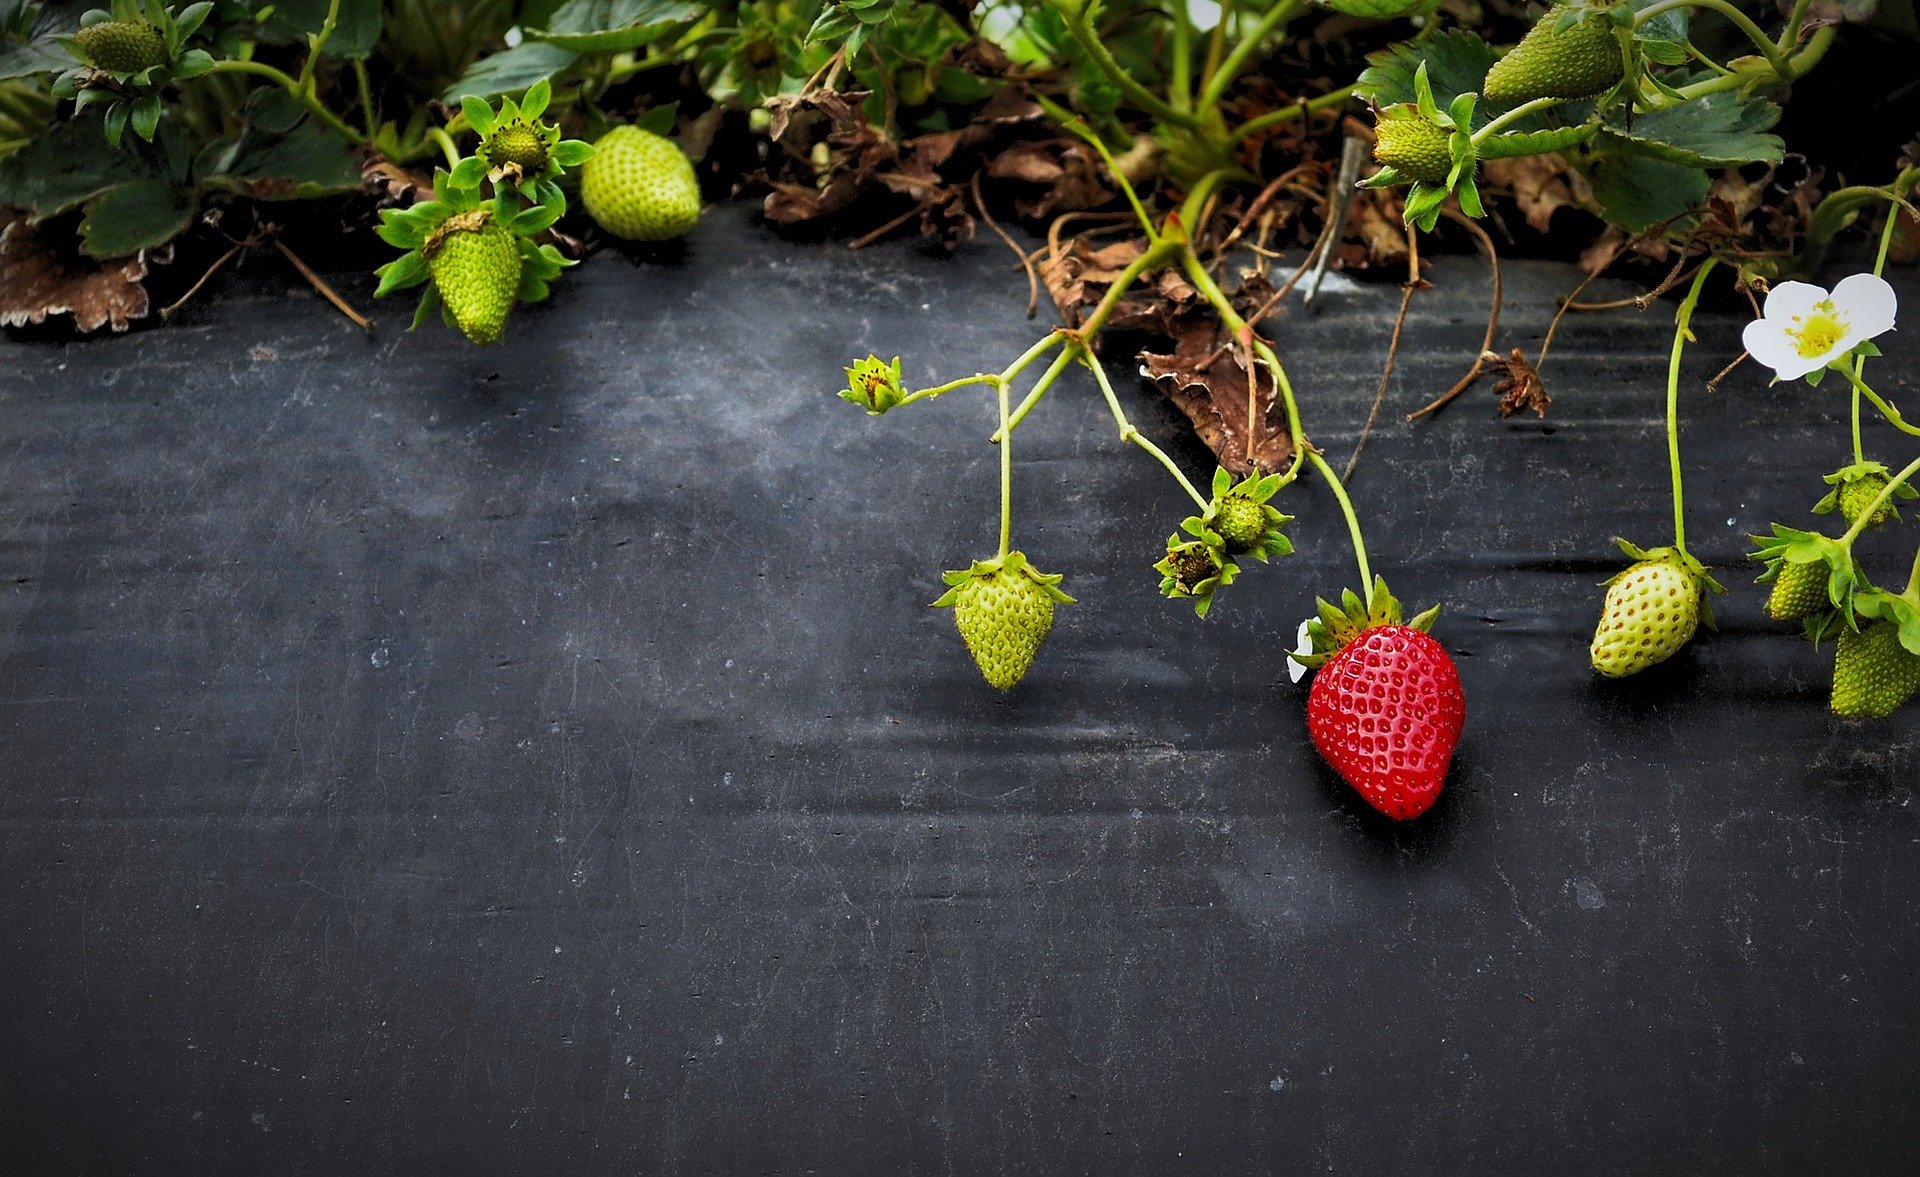 California’s strawberry fields may not be forever. Could robots help?